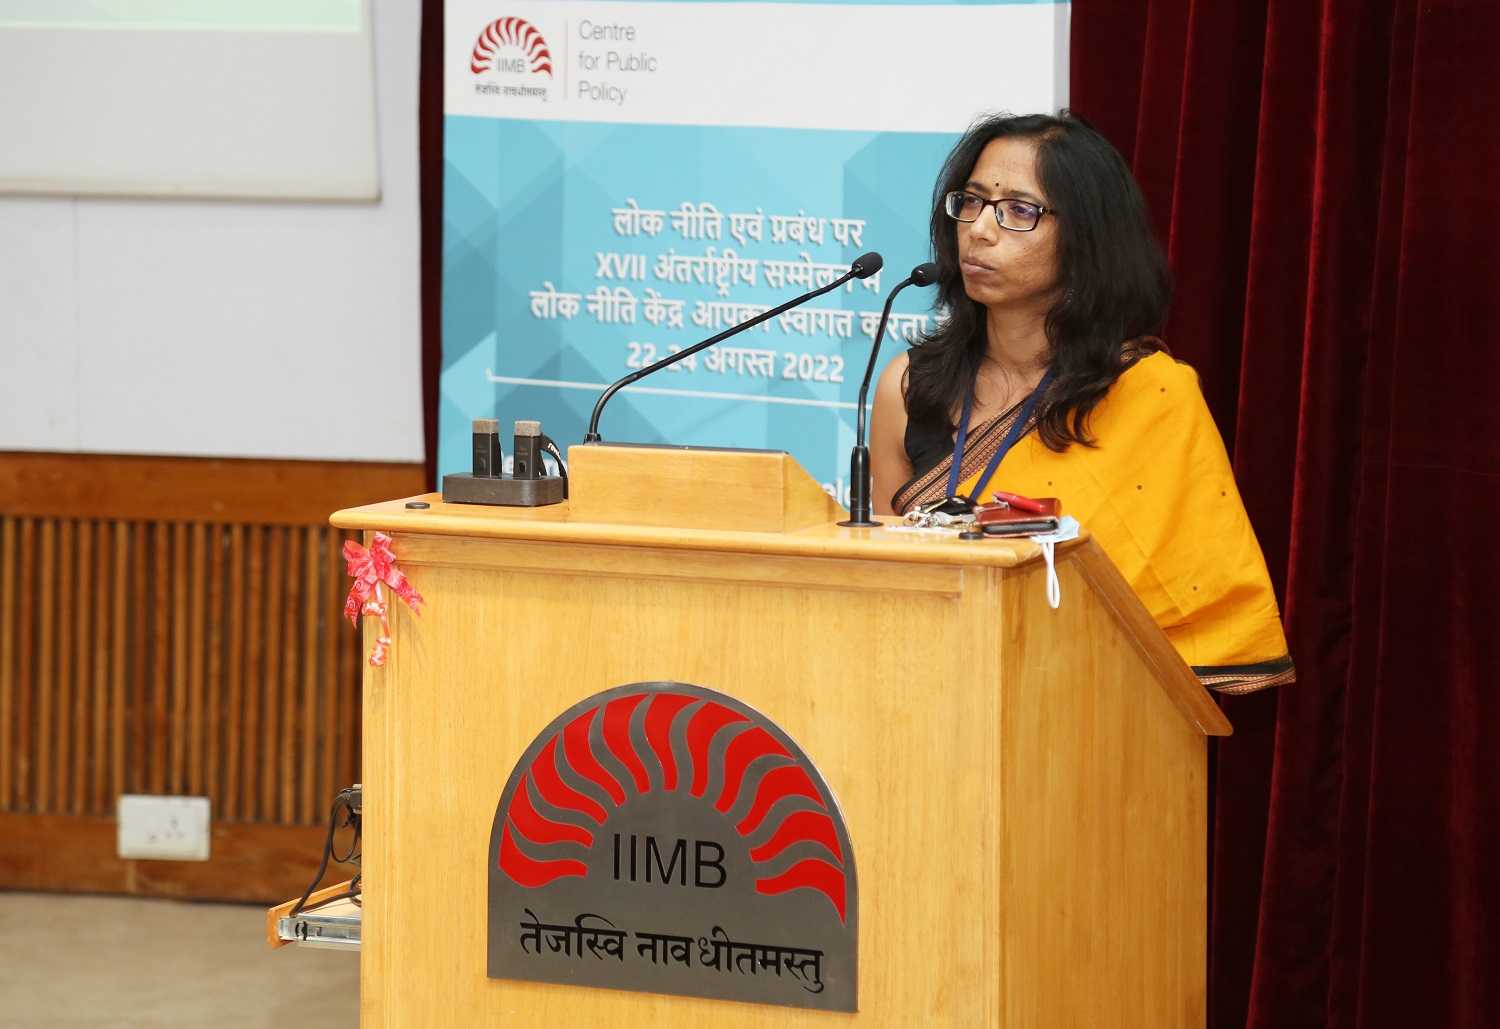 Prof. Hema Swaminathan, faculty, Centre for Public Policy, moderates the session on ‘Inclusivity of Public Policy in India’ led by Dr. Virginius Xaxa, Visiting Professor, Institute for Human Development, New Delhi, at the CPP conference on 24th August.